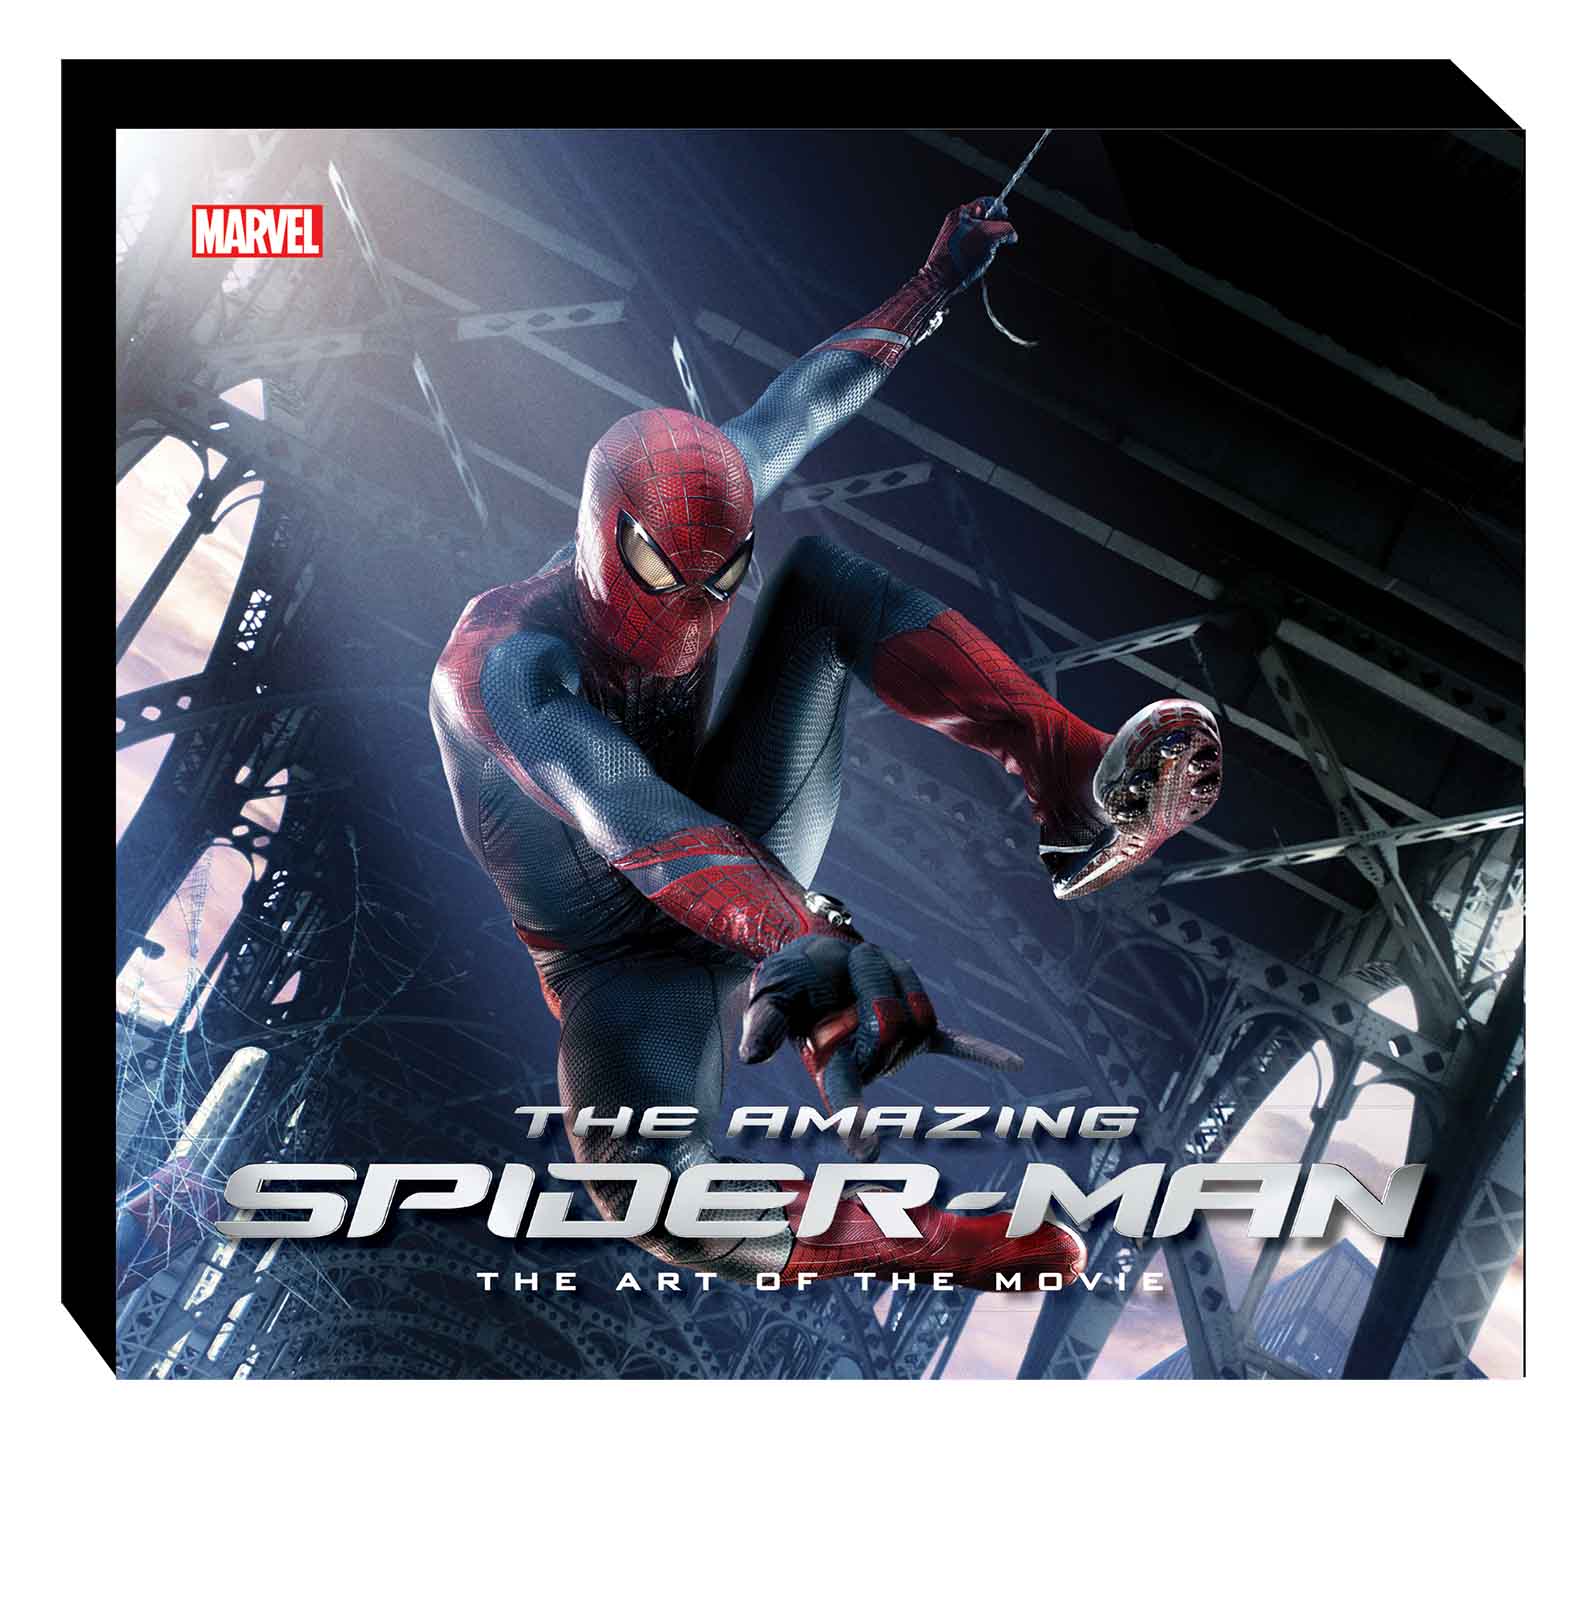 The Amazing Spider-Man: The Art of the Movie (Hardcover)